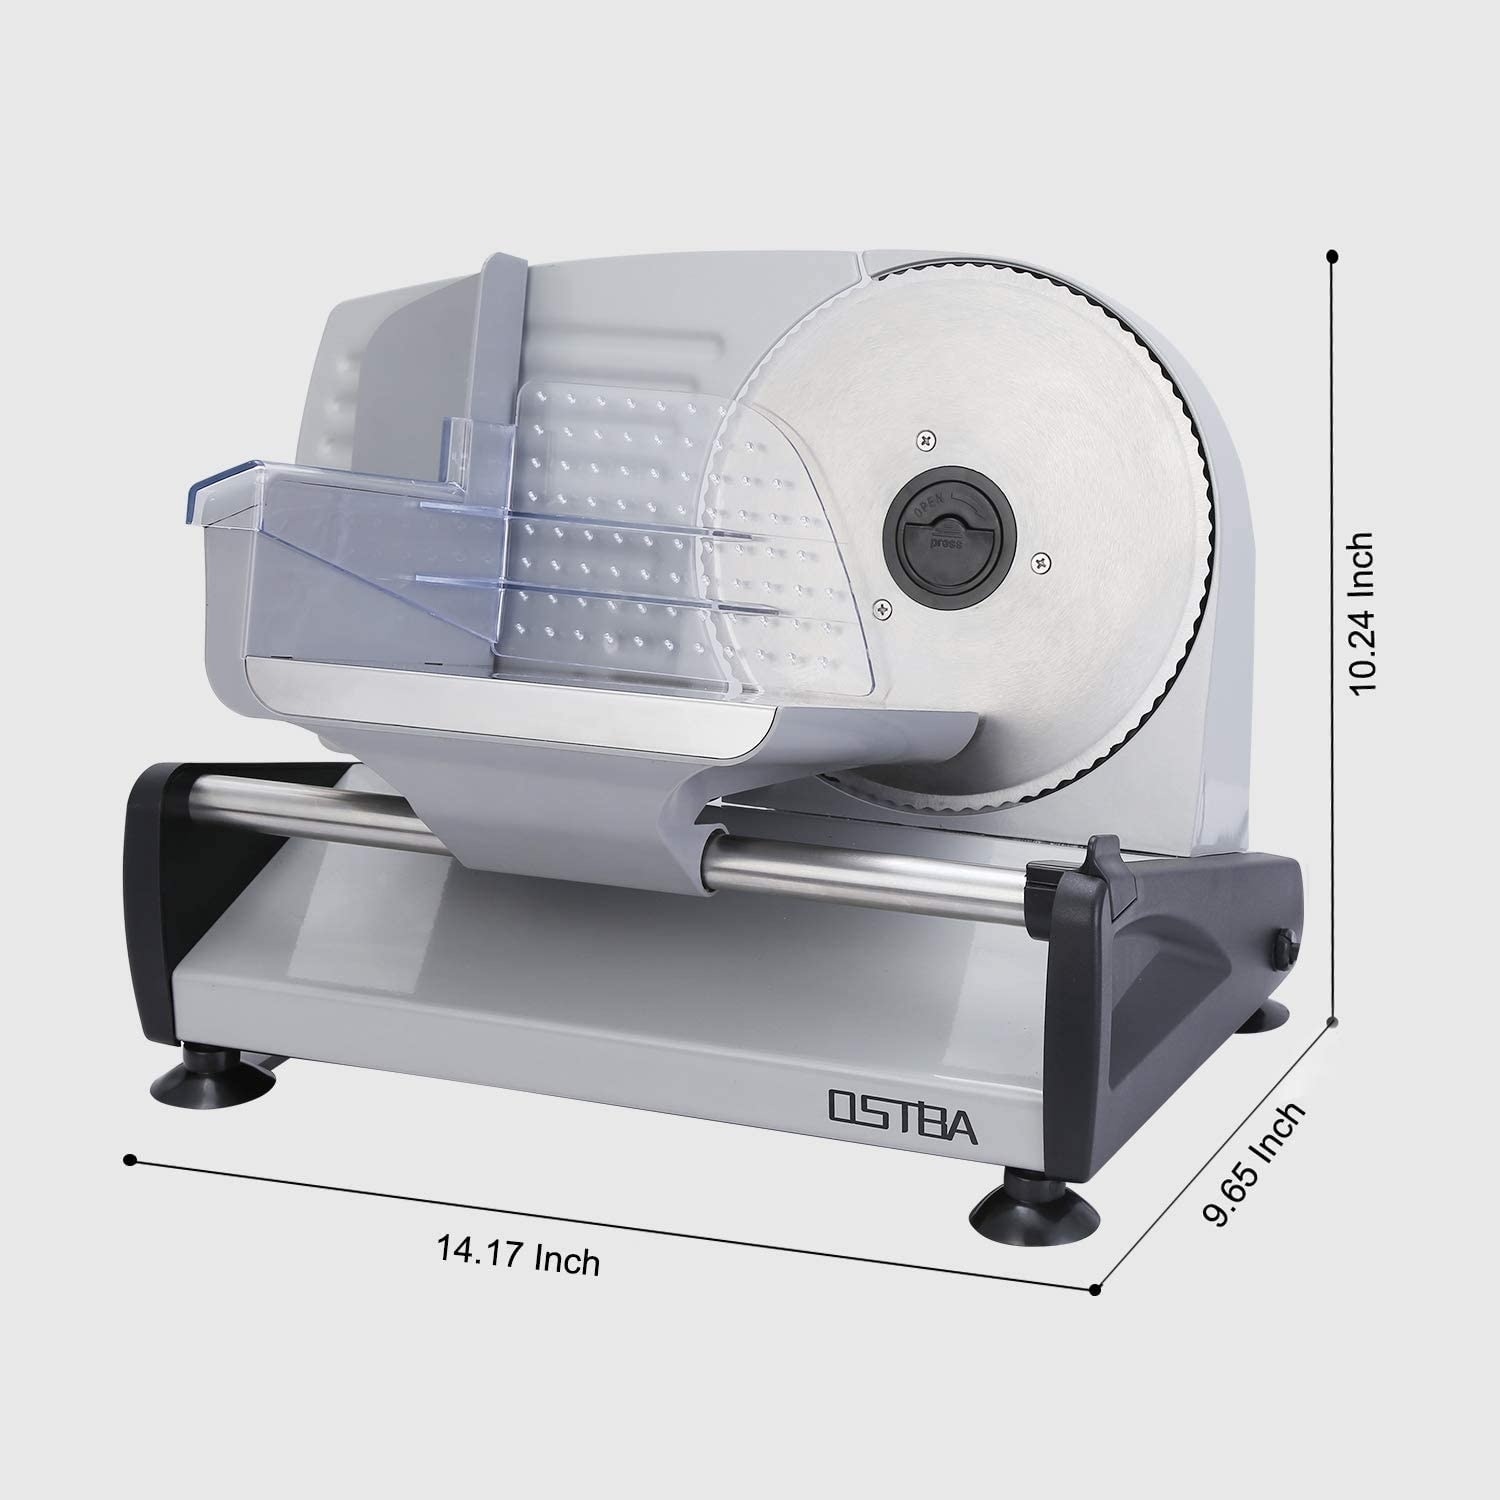 OSTBA Electric Meat Slicer with Child Lock Protection (150W) - 14.6L x  9.4W x 10.2H - Bed Bath & Beyond - 37280216